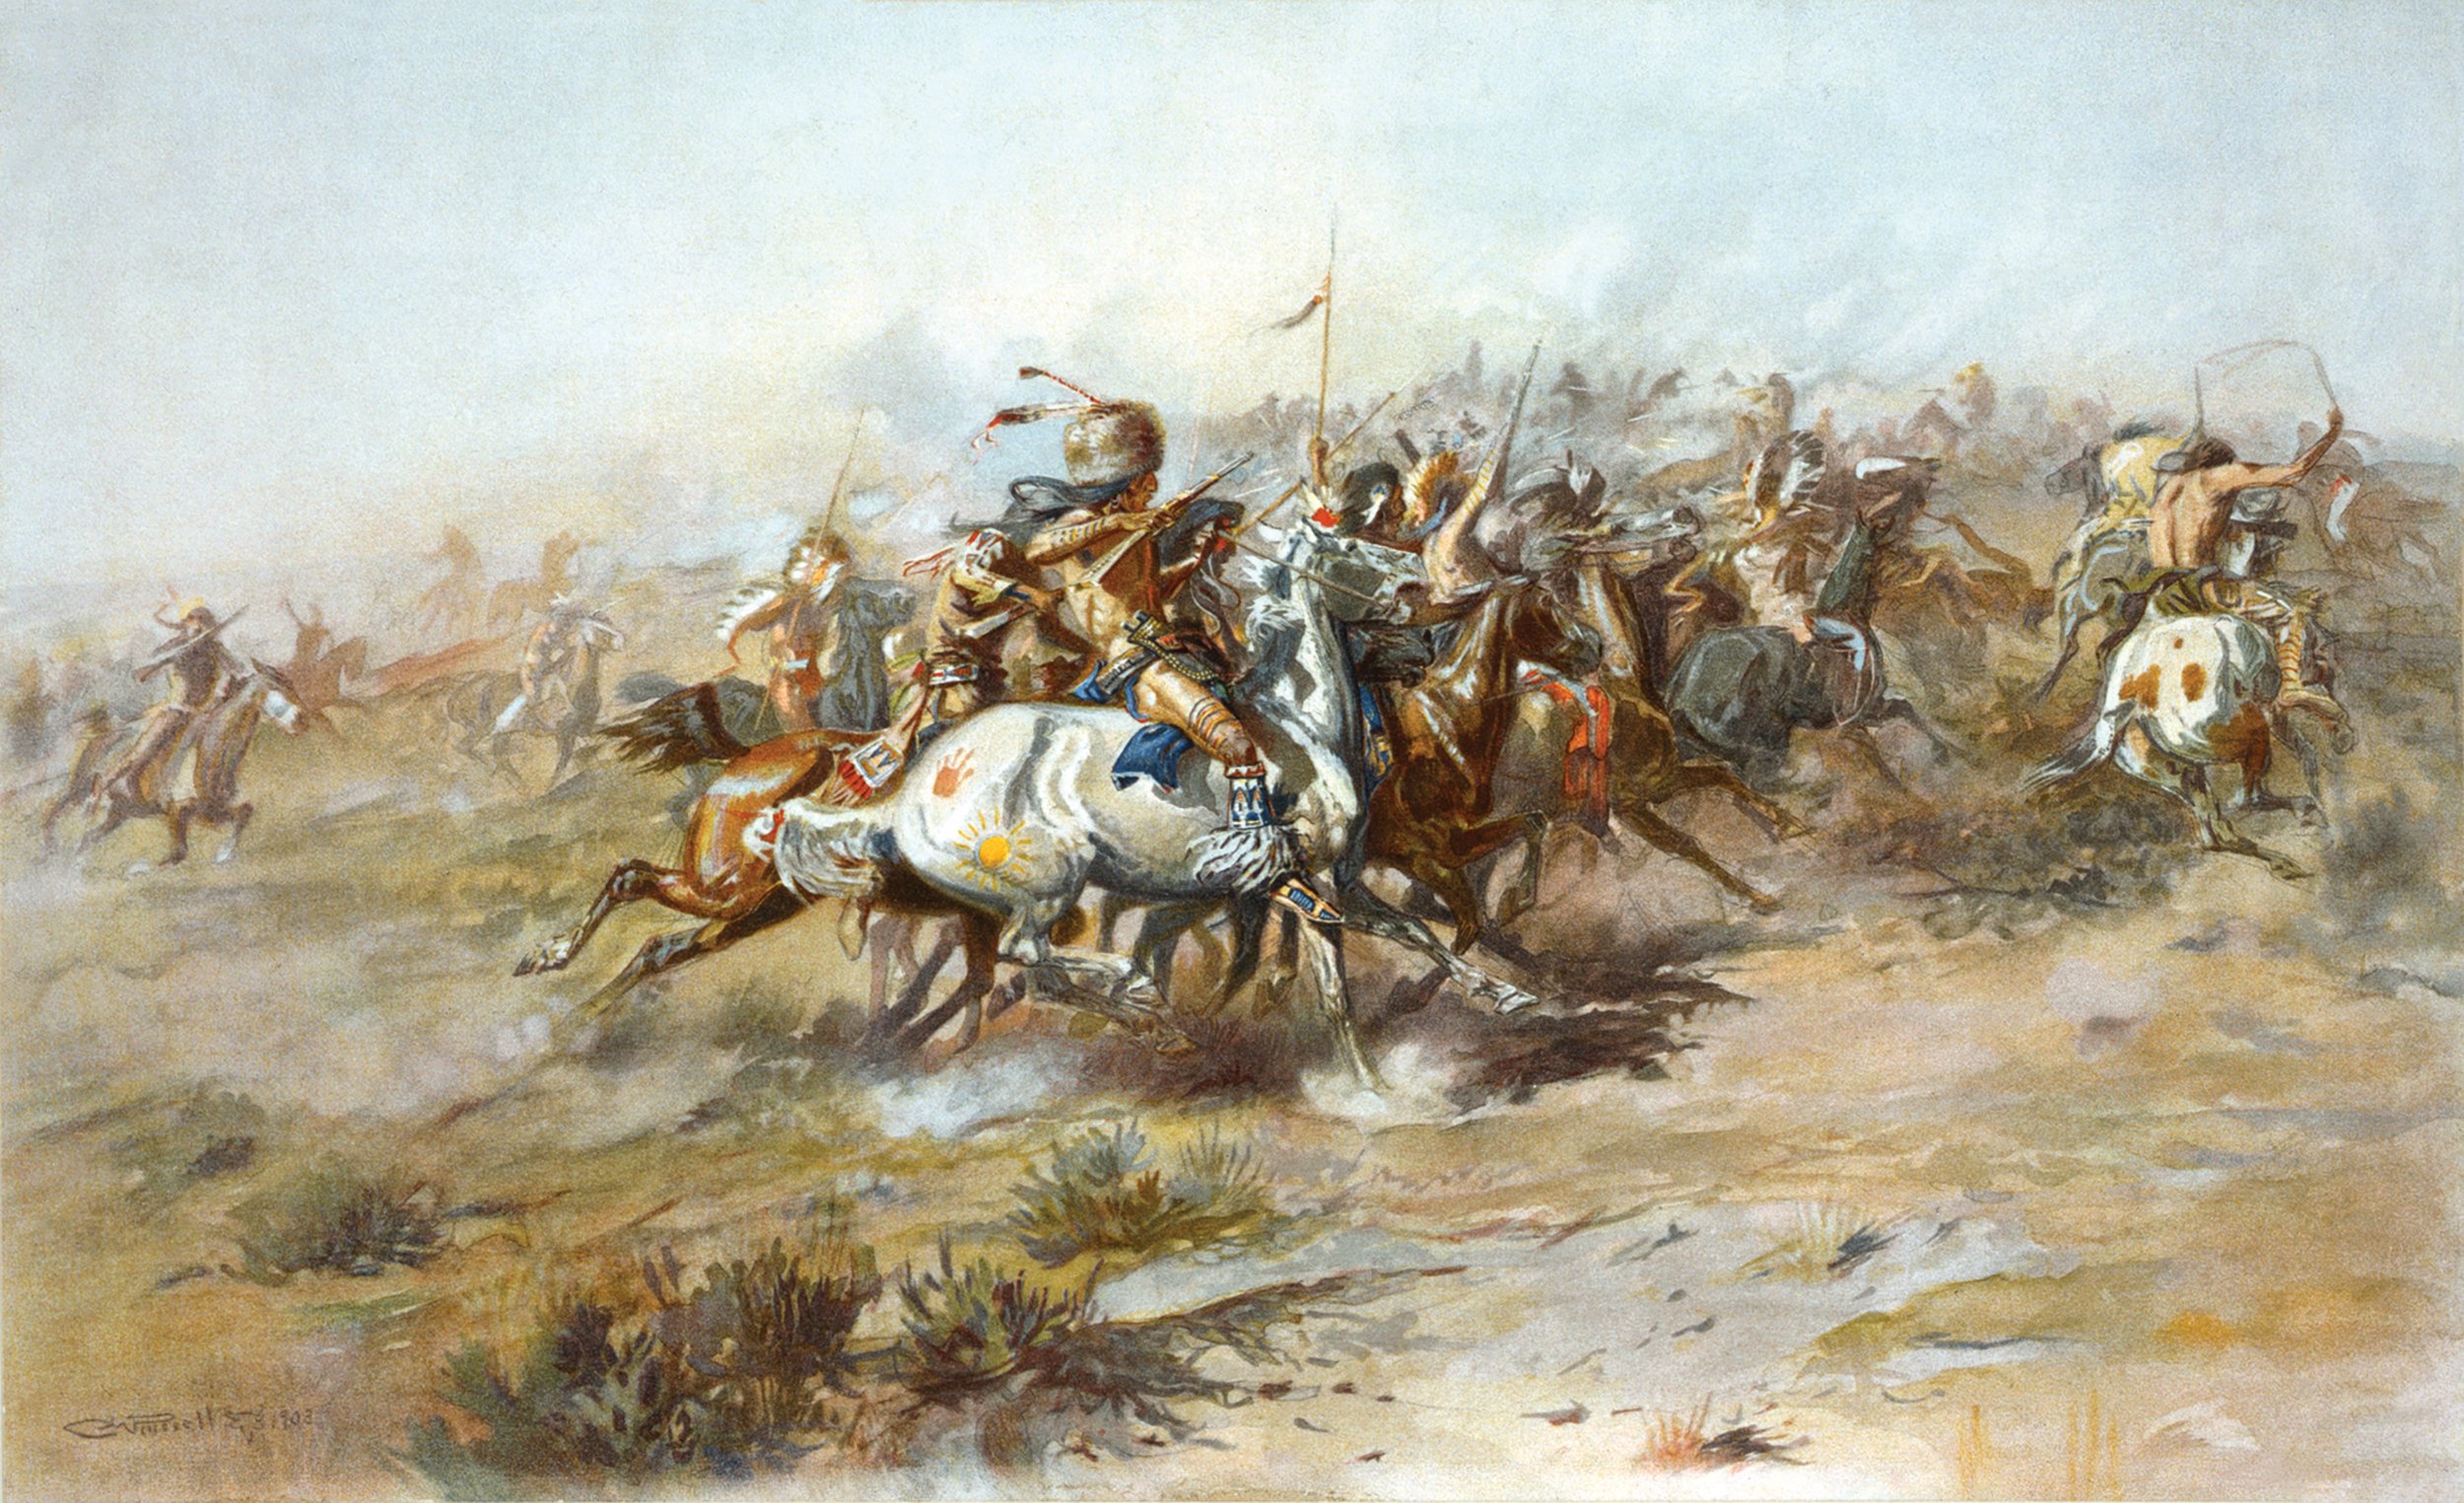 The Custer Fight, by Charles Marion Russell, lithograph showing Battle of Little Bighorn from the Native American side, 1903 (Library of
Congress, with restoration by Adam Cuerden)